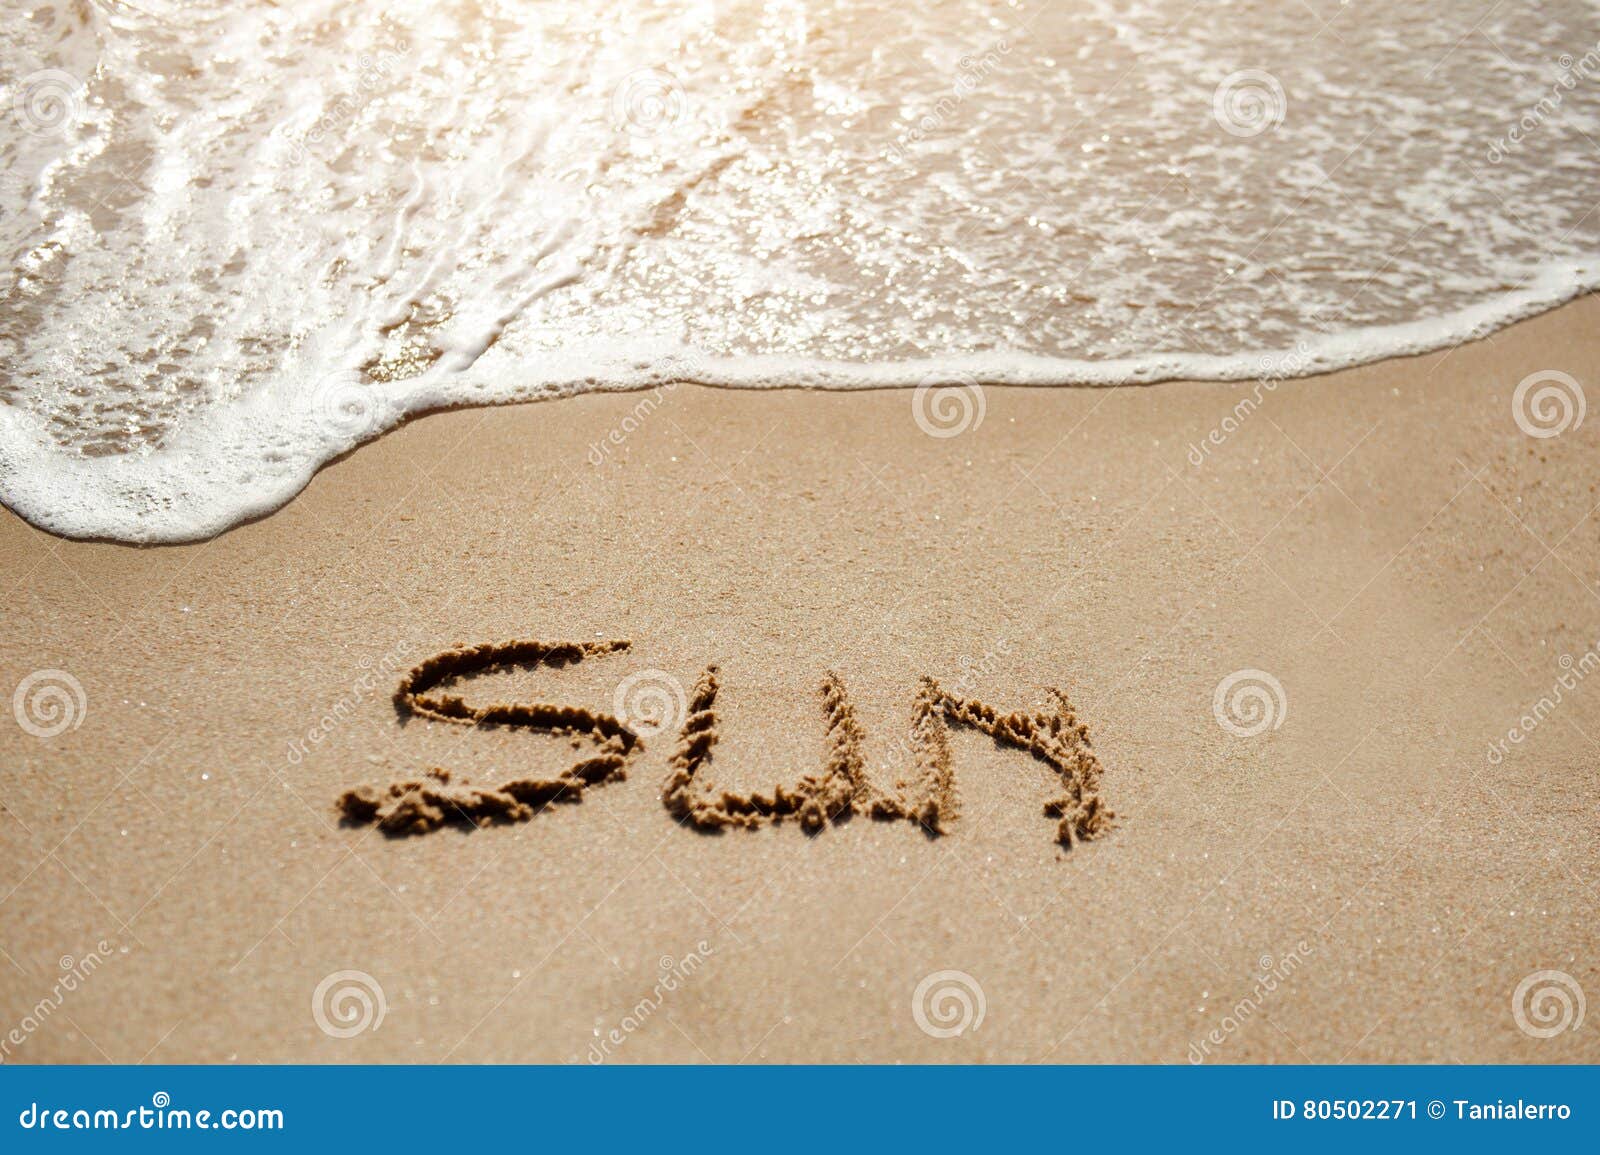 Sun Written On The Sand Beach Near Sea Holiday Relax Concept Stock Image Image Of Landscape 